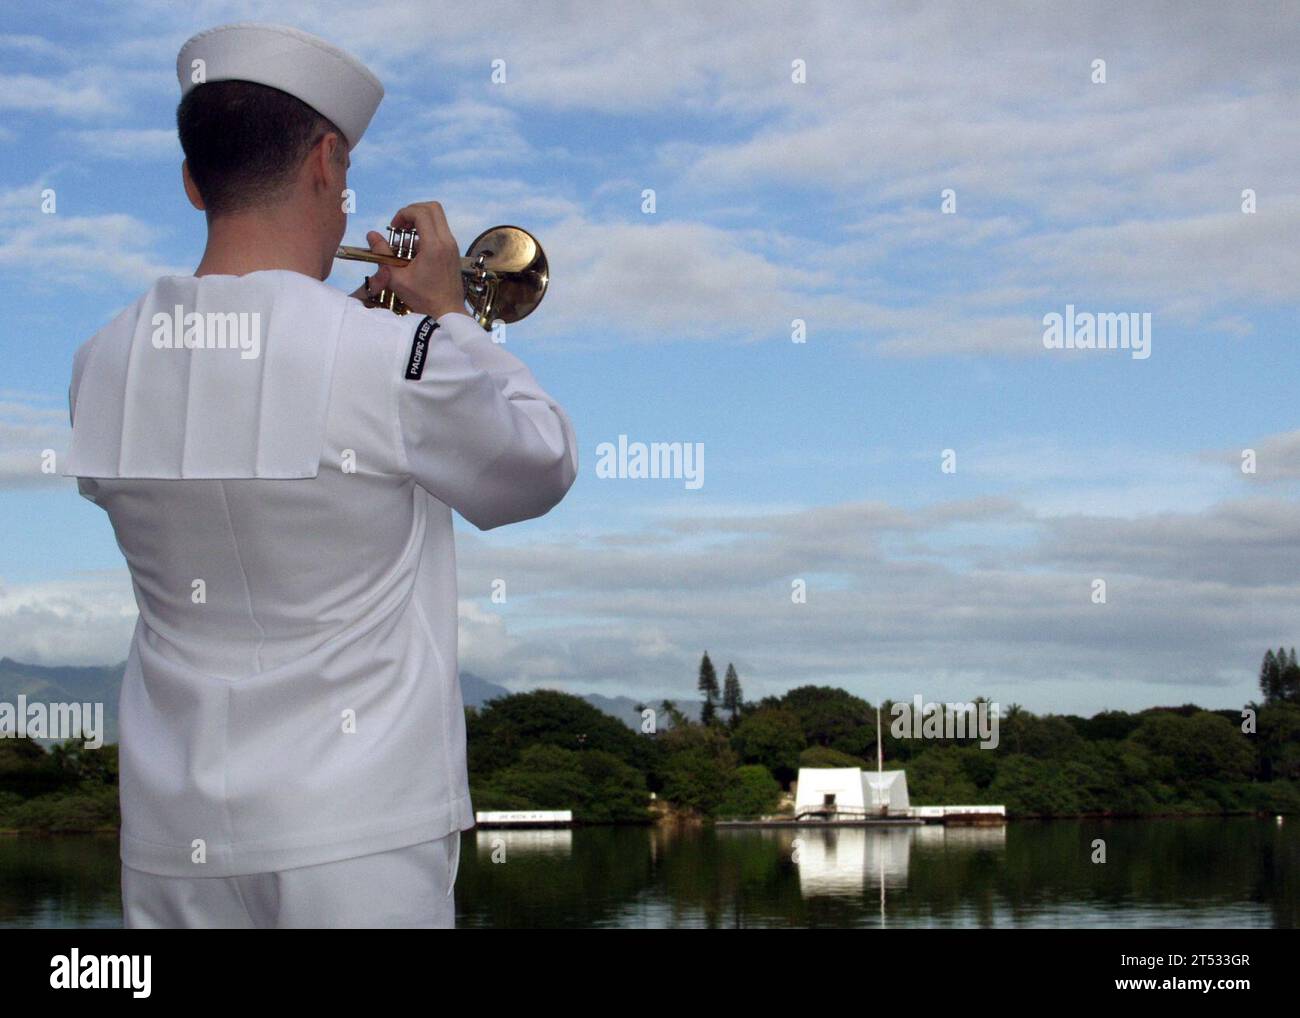 0812070879R-004  PEARL HARBOR, Hawaii (Dec. 7, 2008) A Sailor from the U.S. Pacific Fleet Band plays taps during a joint U.S. Navy/National Park Service ceremony commemorating the 67th anniversary of the attack on Pearl Harbor. The theme of this yearХs historic commemoration, ТPacific War Memories: The Heroic Response to Pearl Harbor,У emphasized the brave efforts of those who fought at sea, on land, and in the air, to turn the tide in the Pacific. More than 2,000 distinguished guests and the general public joined service members, Pearl Harbor survivors and their families and friends for the a Stock Photo